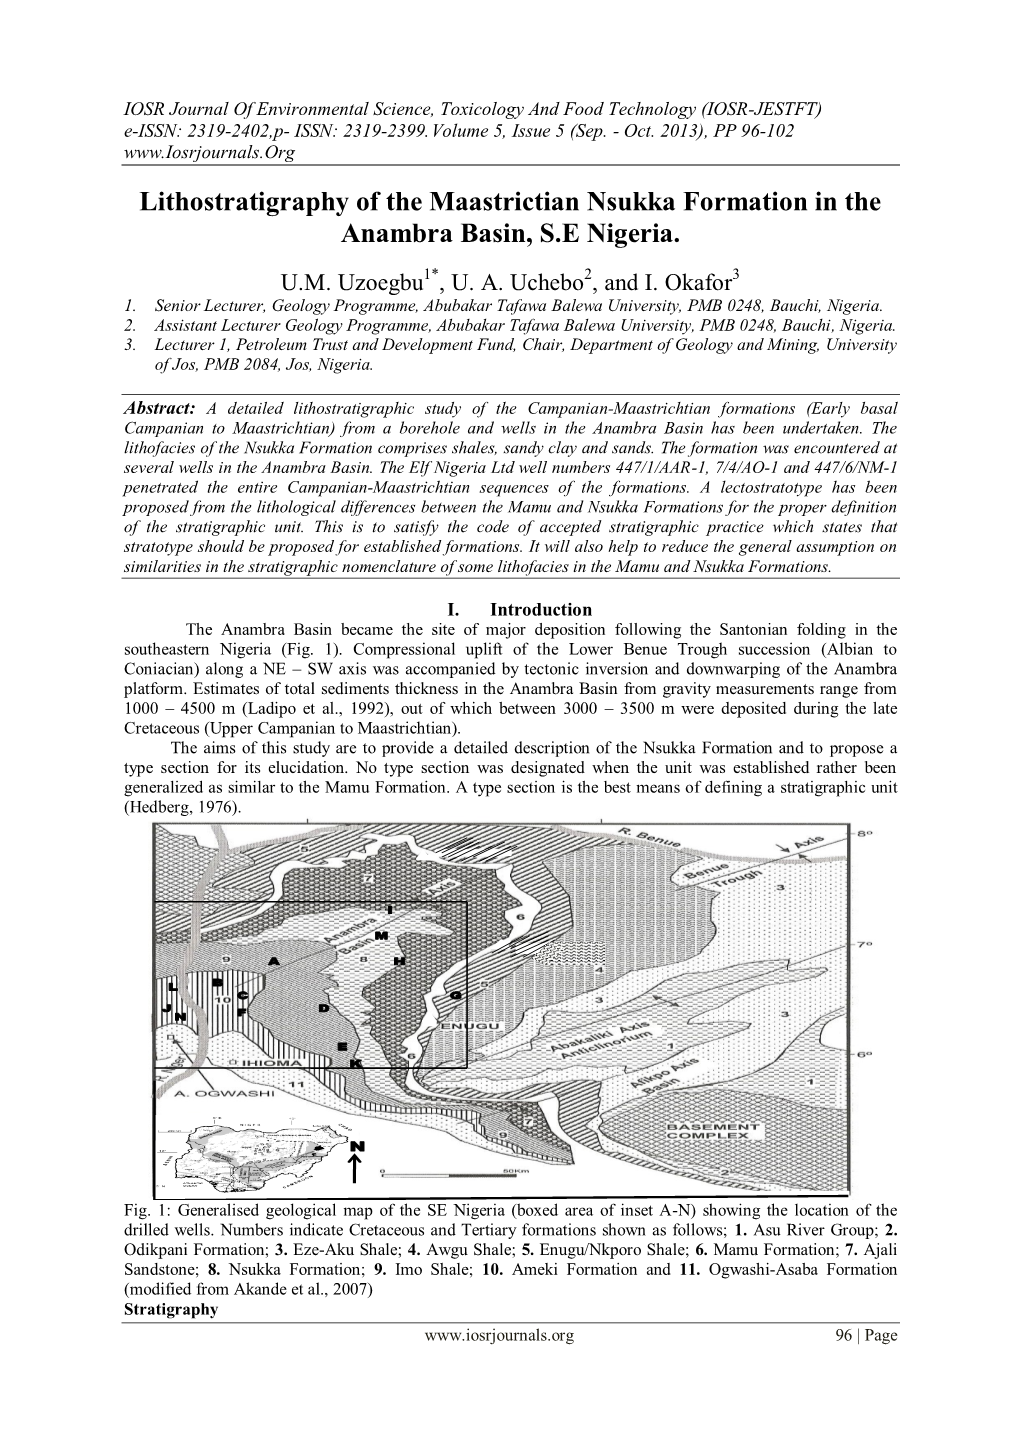 Lithostratigraphy of the Maastrictian Nsukka Formation in the Anambra Basin, S.E Nigeria